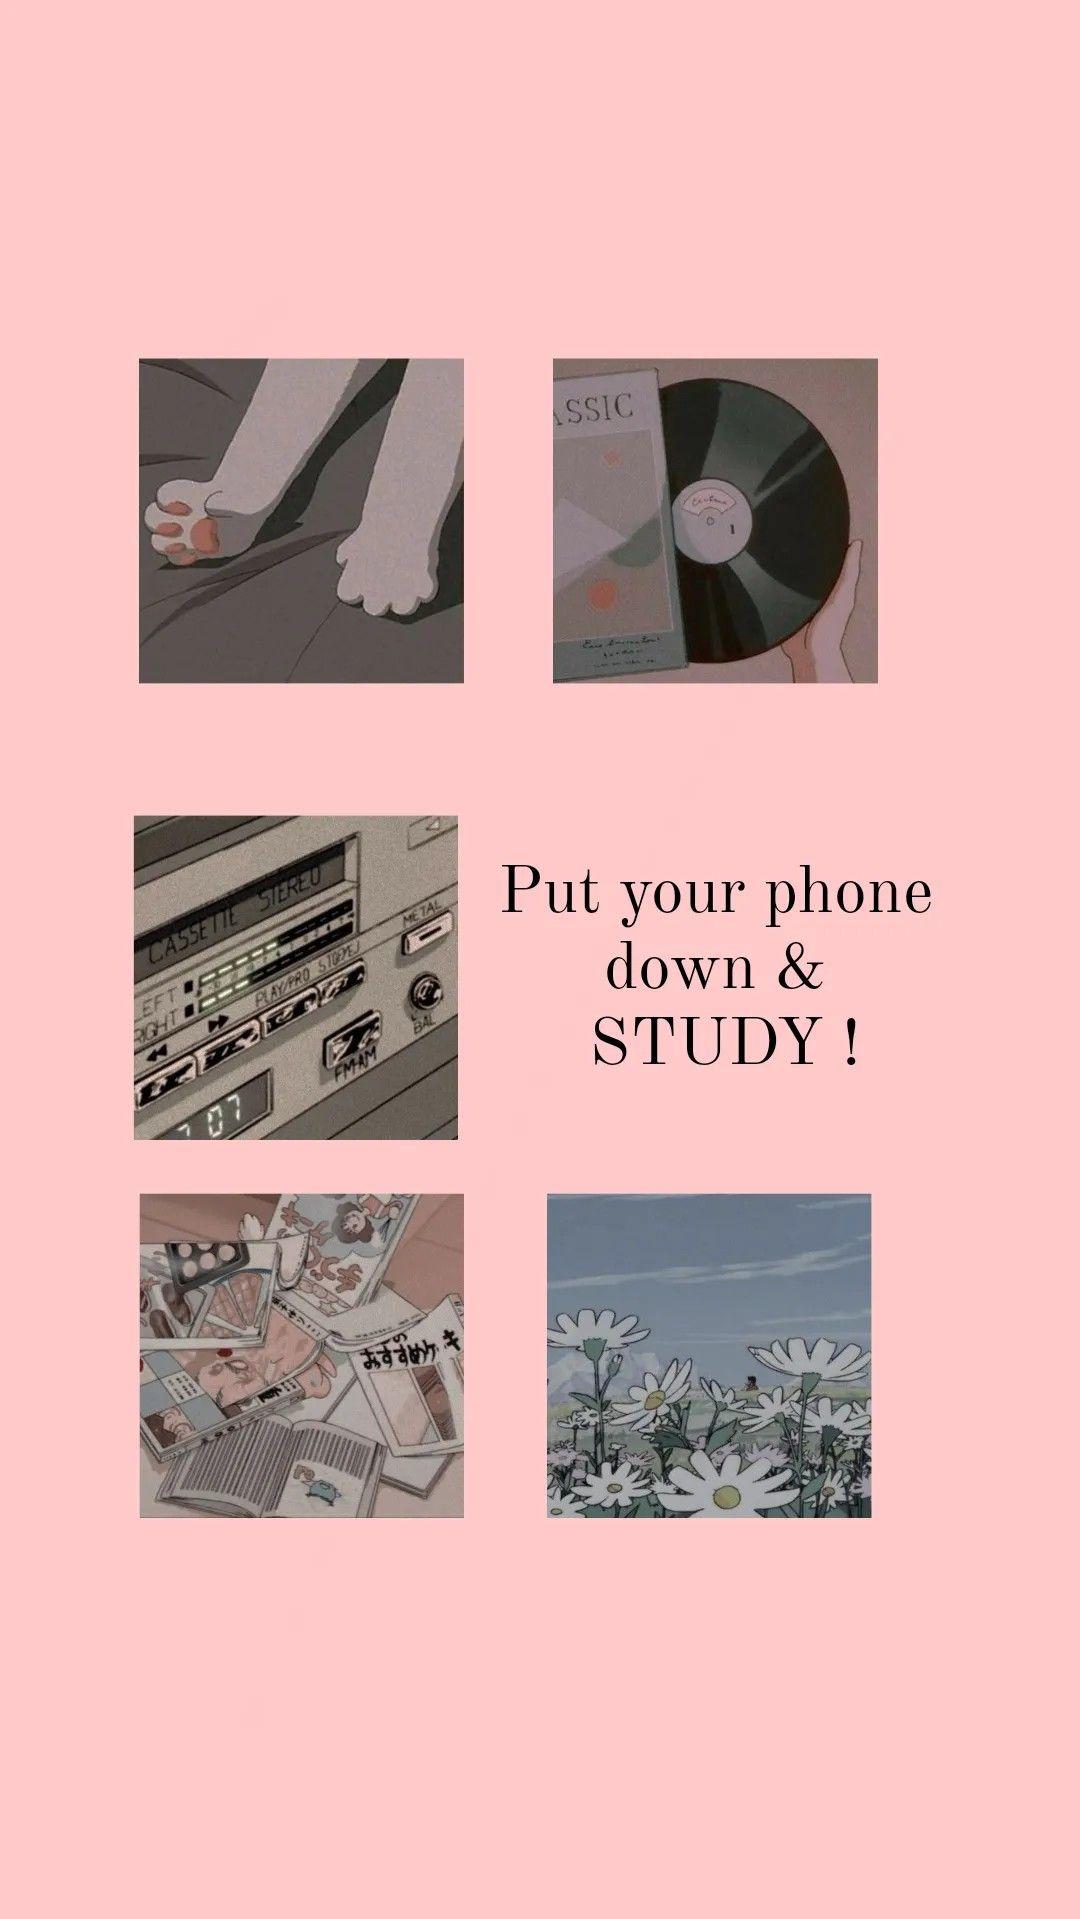 Free Download Study Motivation Anime Aesthetic Study Reminder Wallpaper